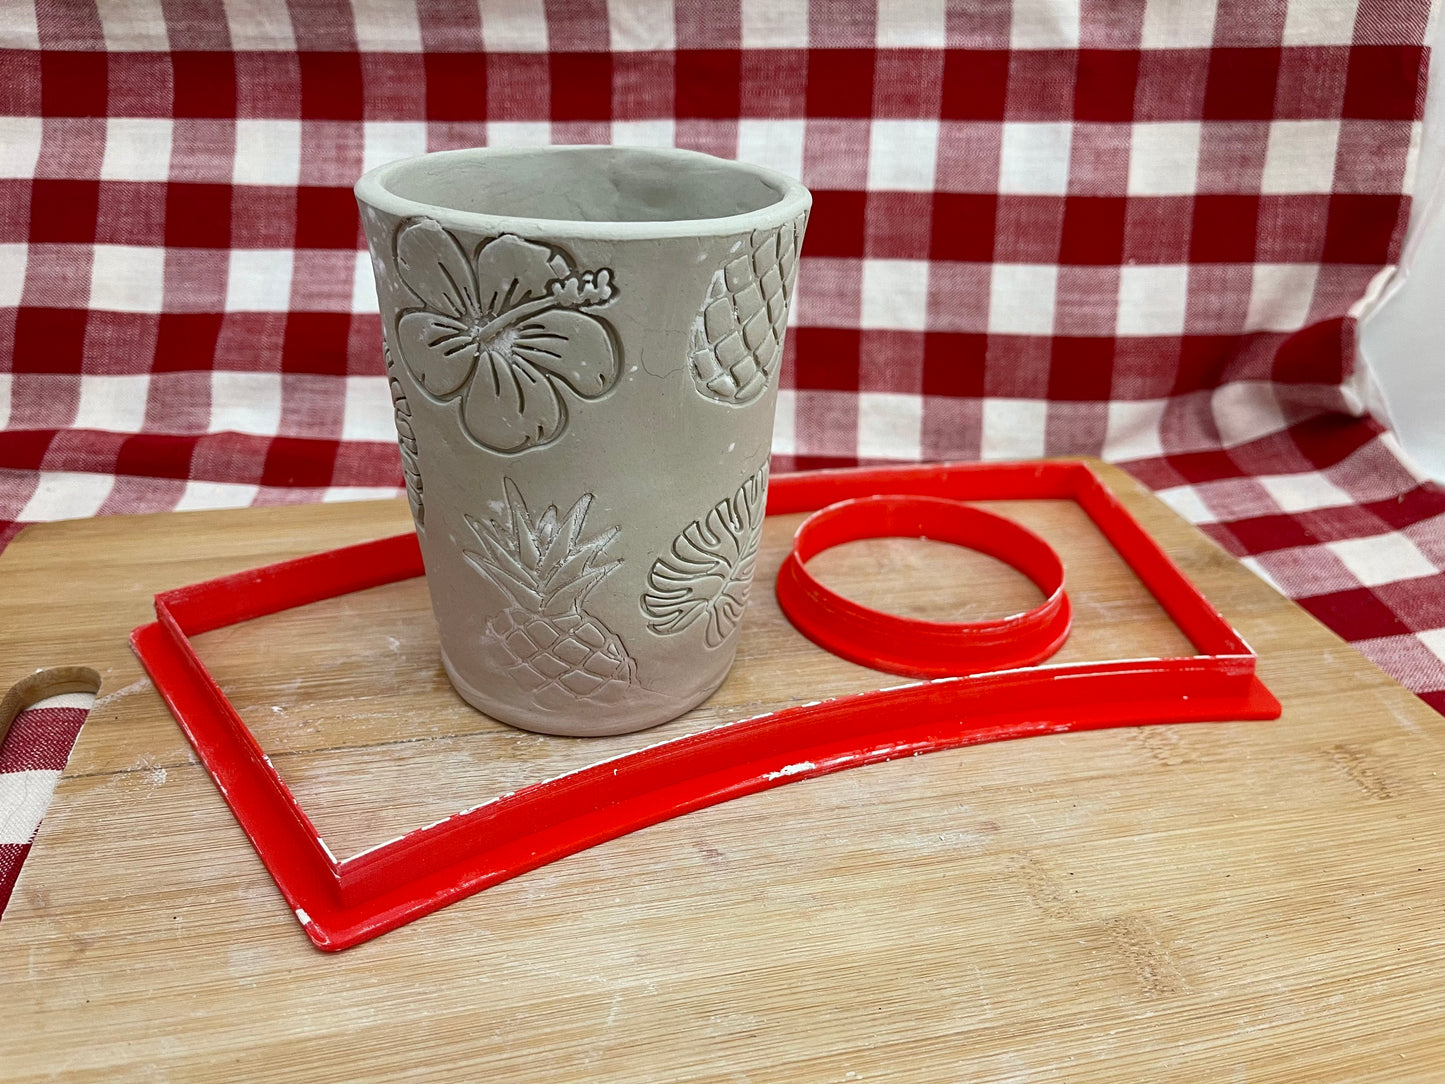 Cup Template Clay Cutter - 3" Base x 5" Tall x 3.75" Top